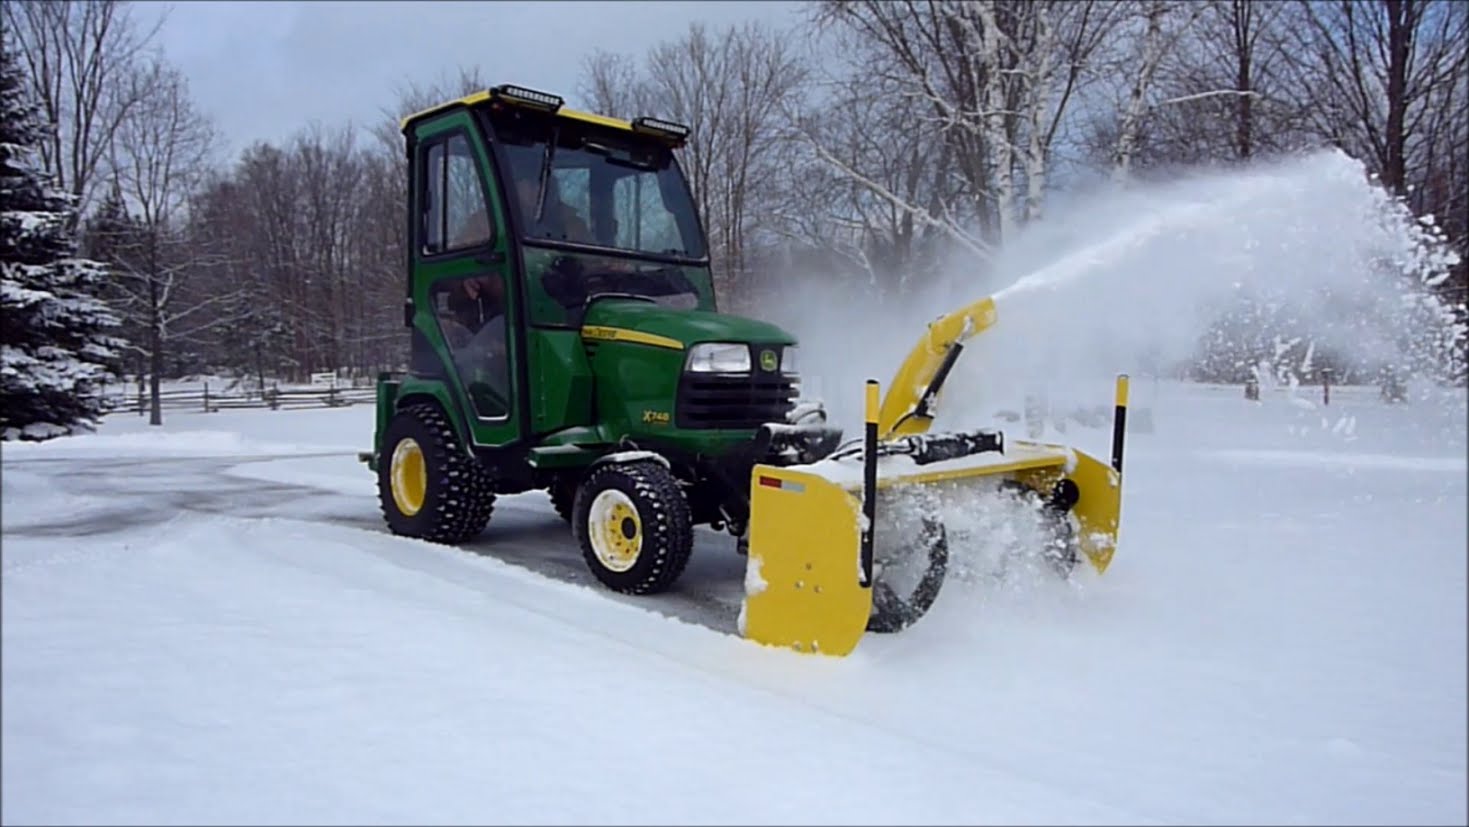 John Deere X748 - 54 Inch Snow Blower Quick Cleanup - YouTube